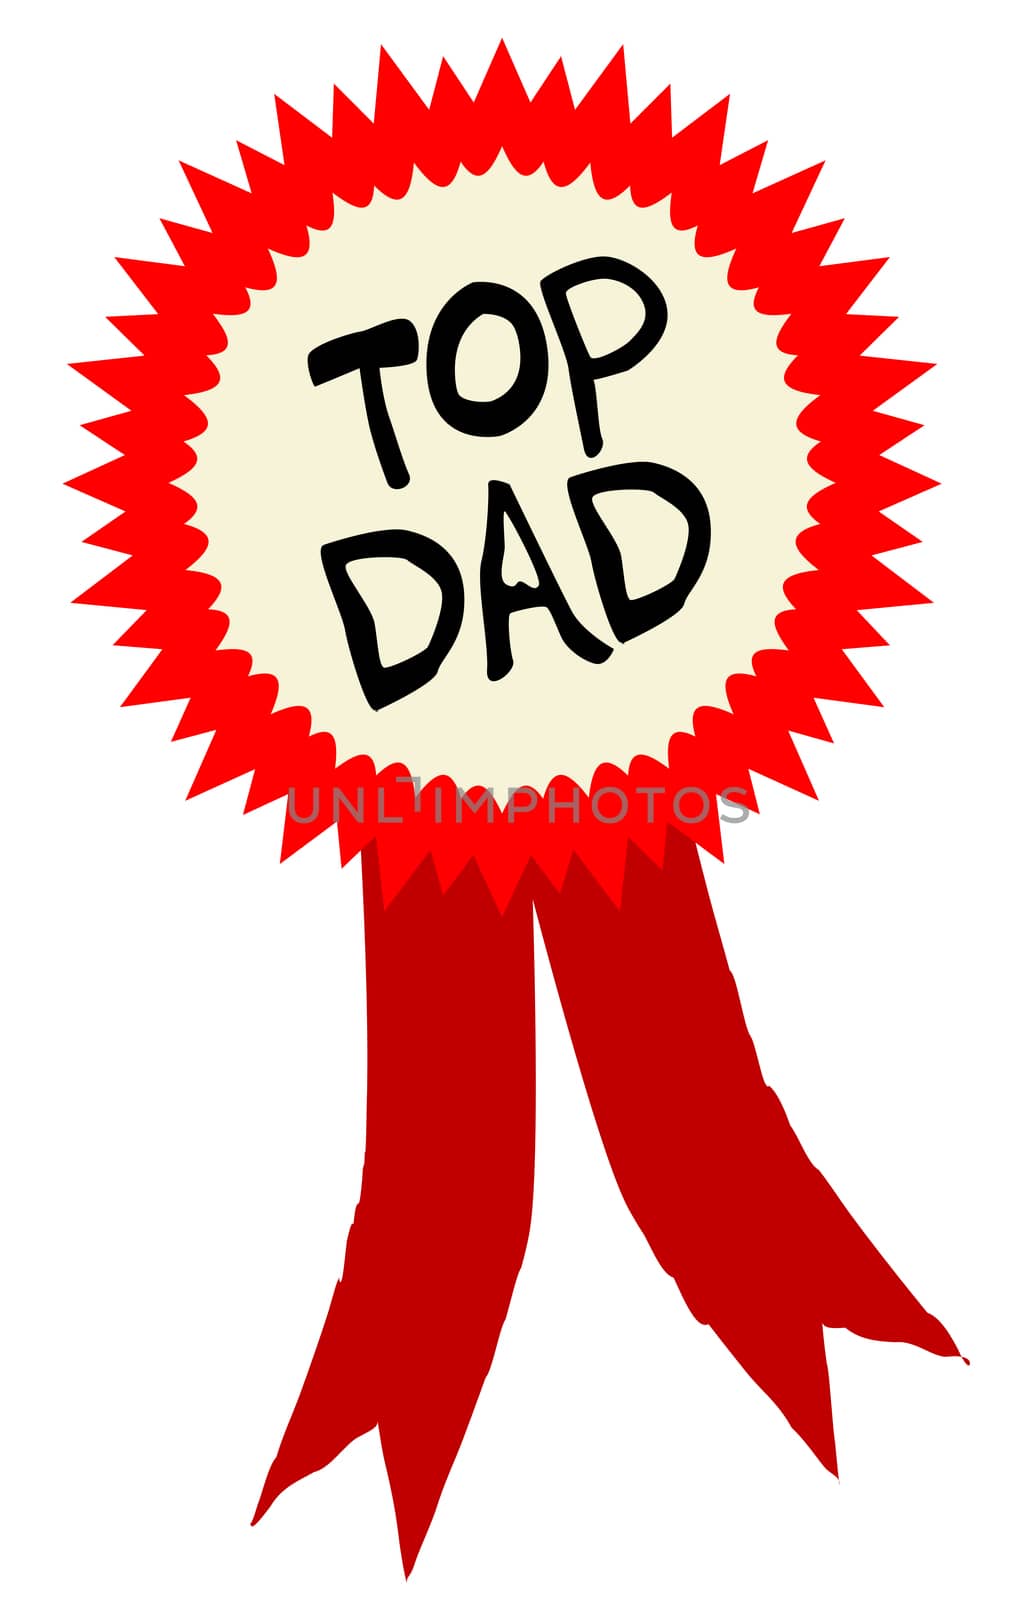 A best dad rosette over a white background.